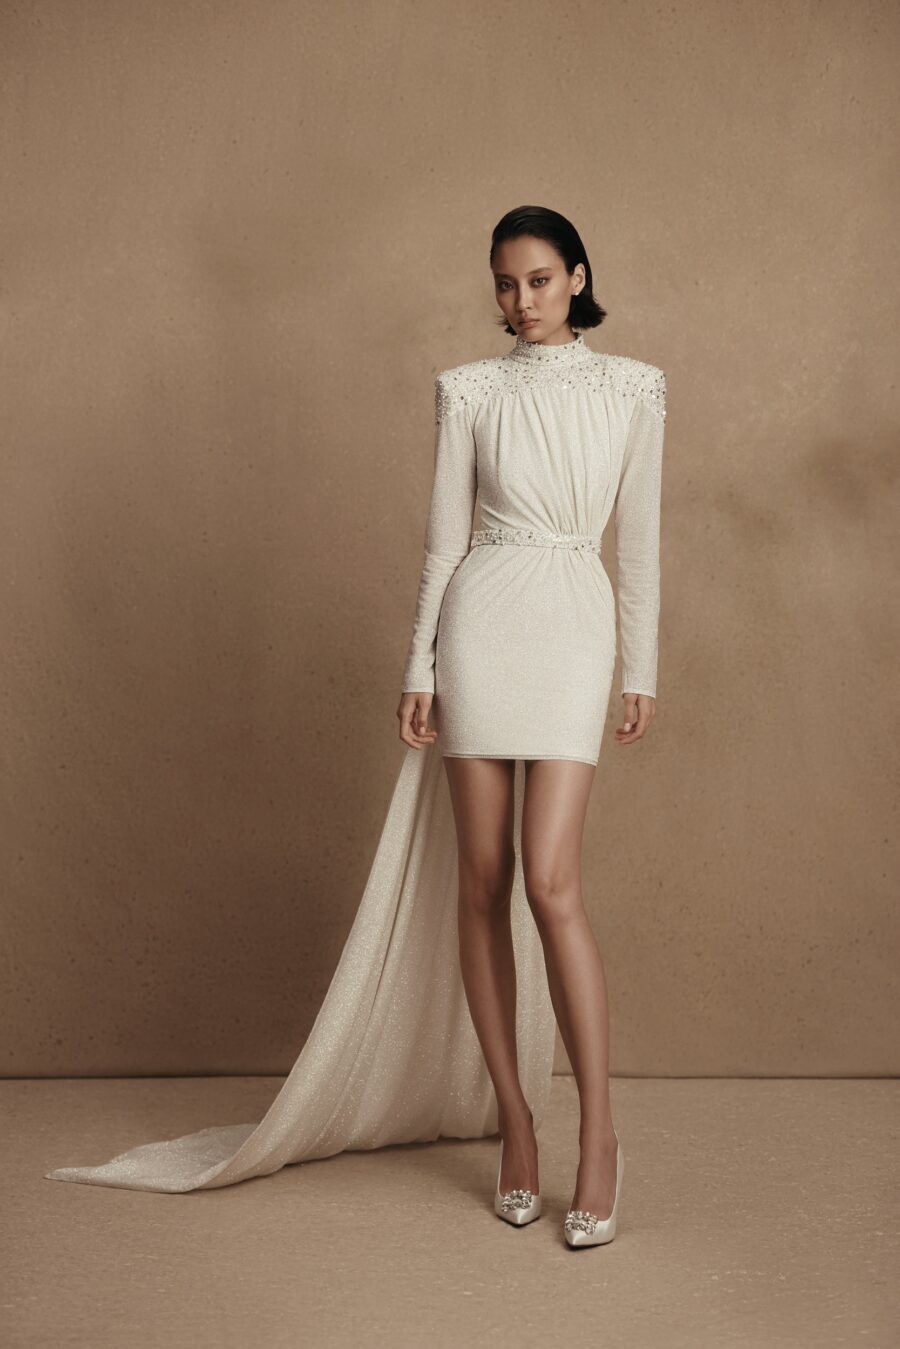 Romie 4 wedding dress by woná concept from personality collection